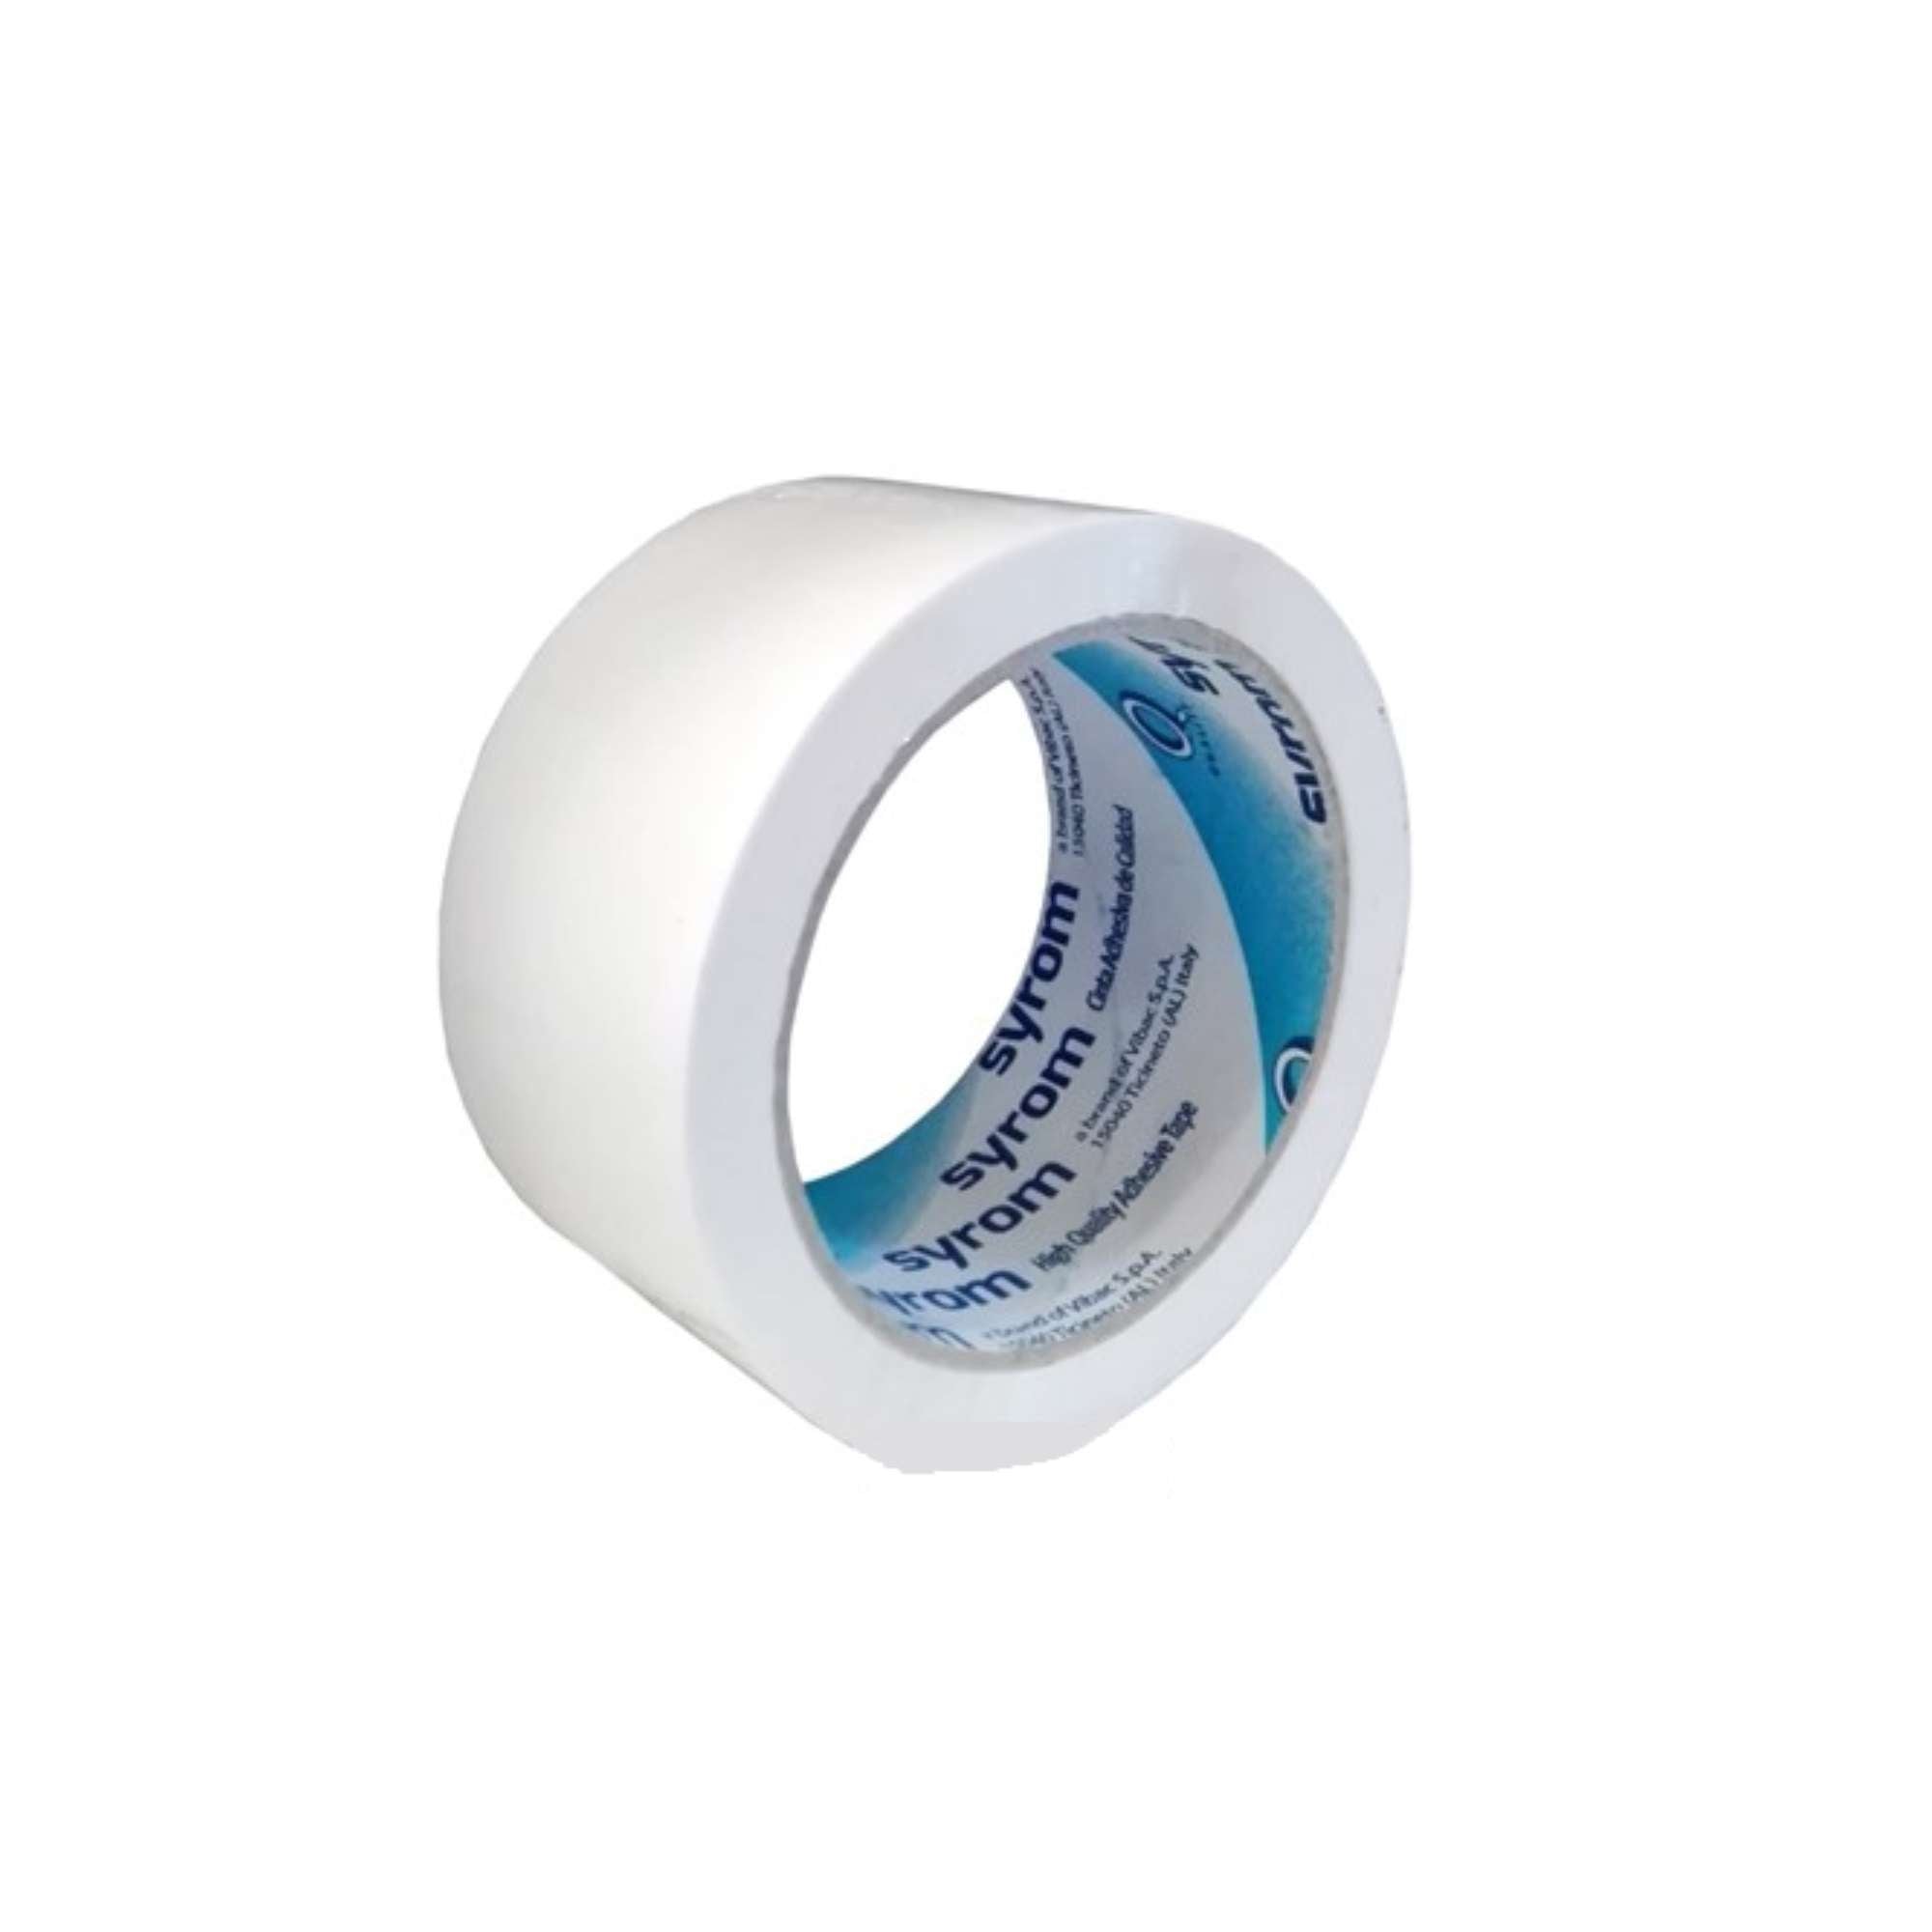 Self-adhesive packaging tape Sylene 230 white 66m x 50mm - Syrom 2341